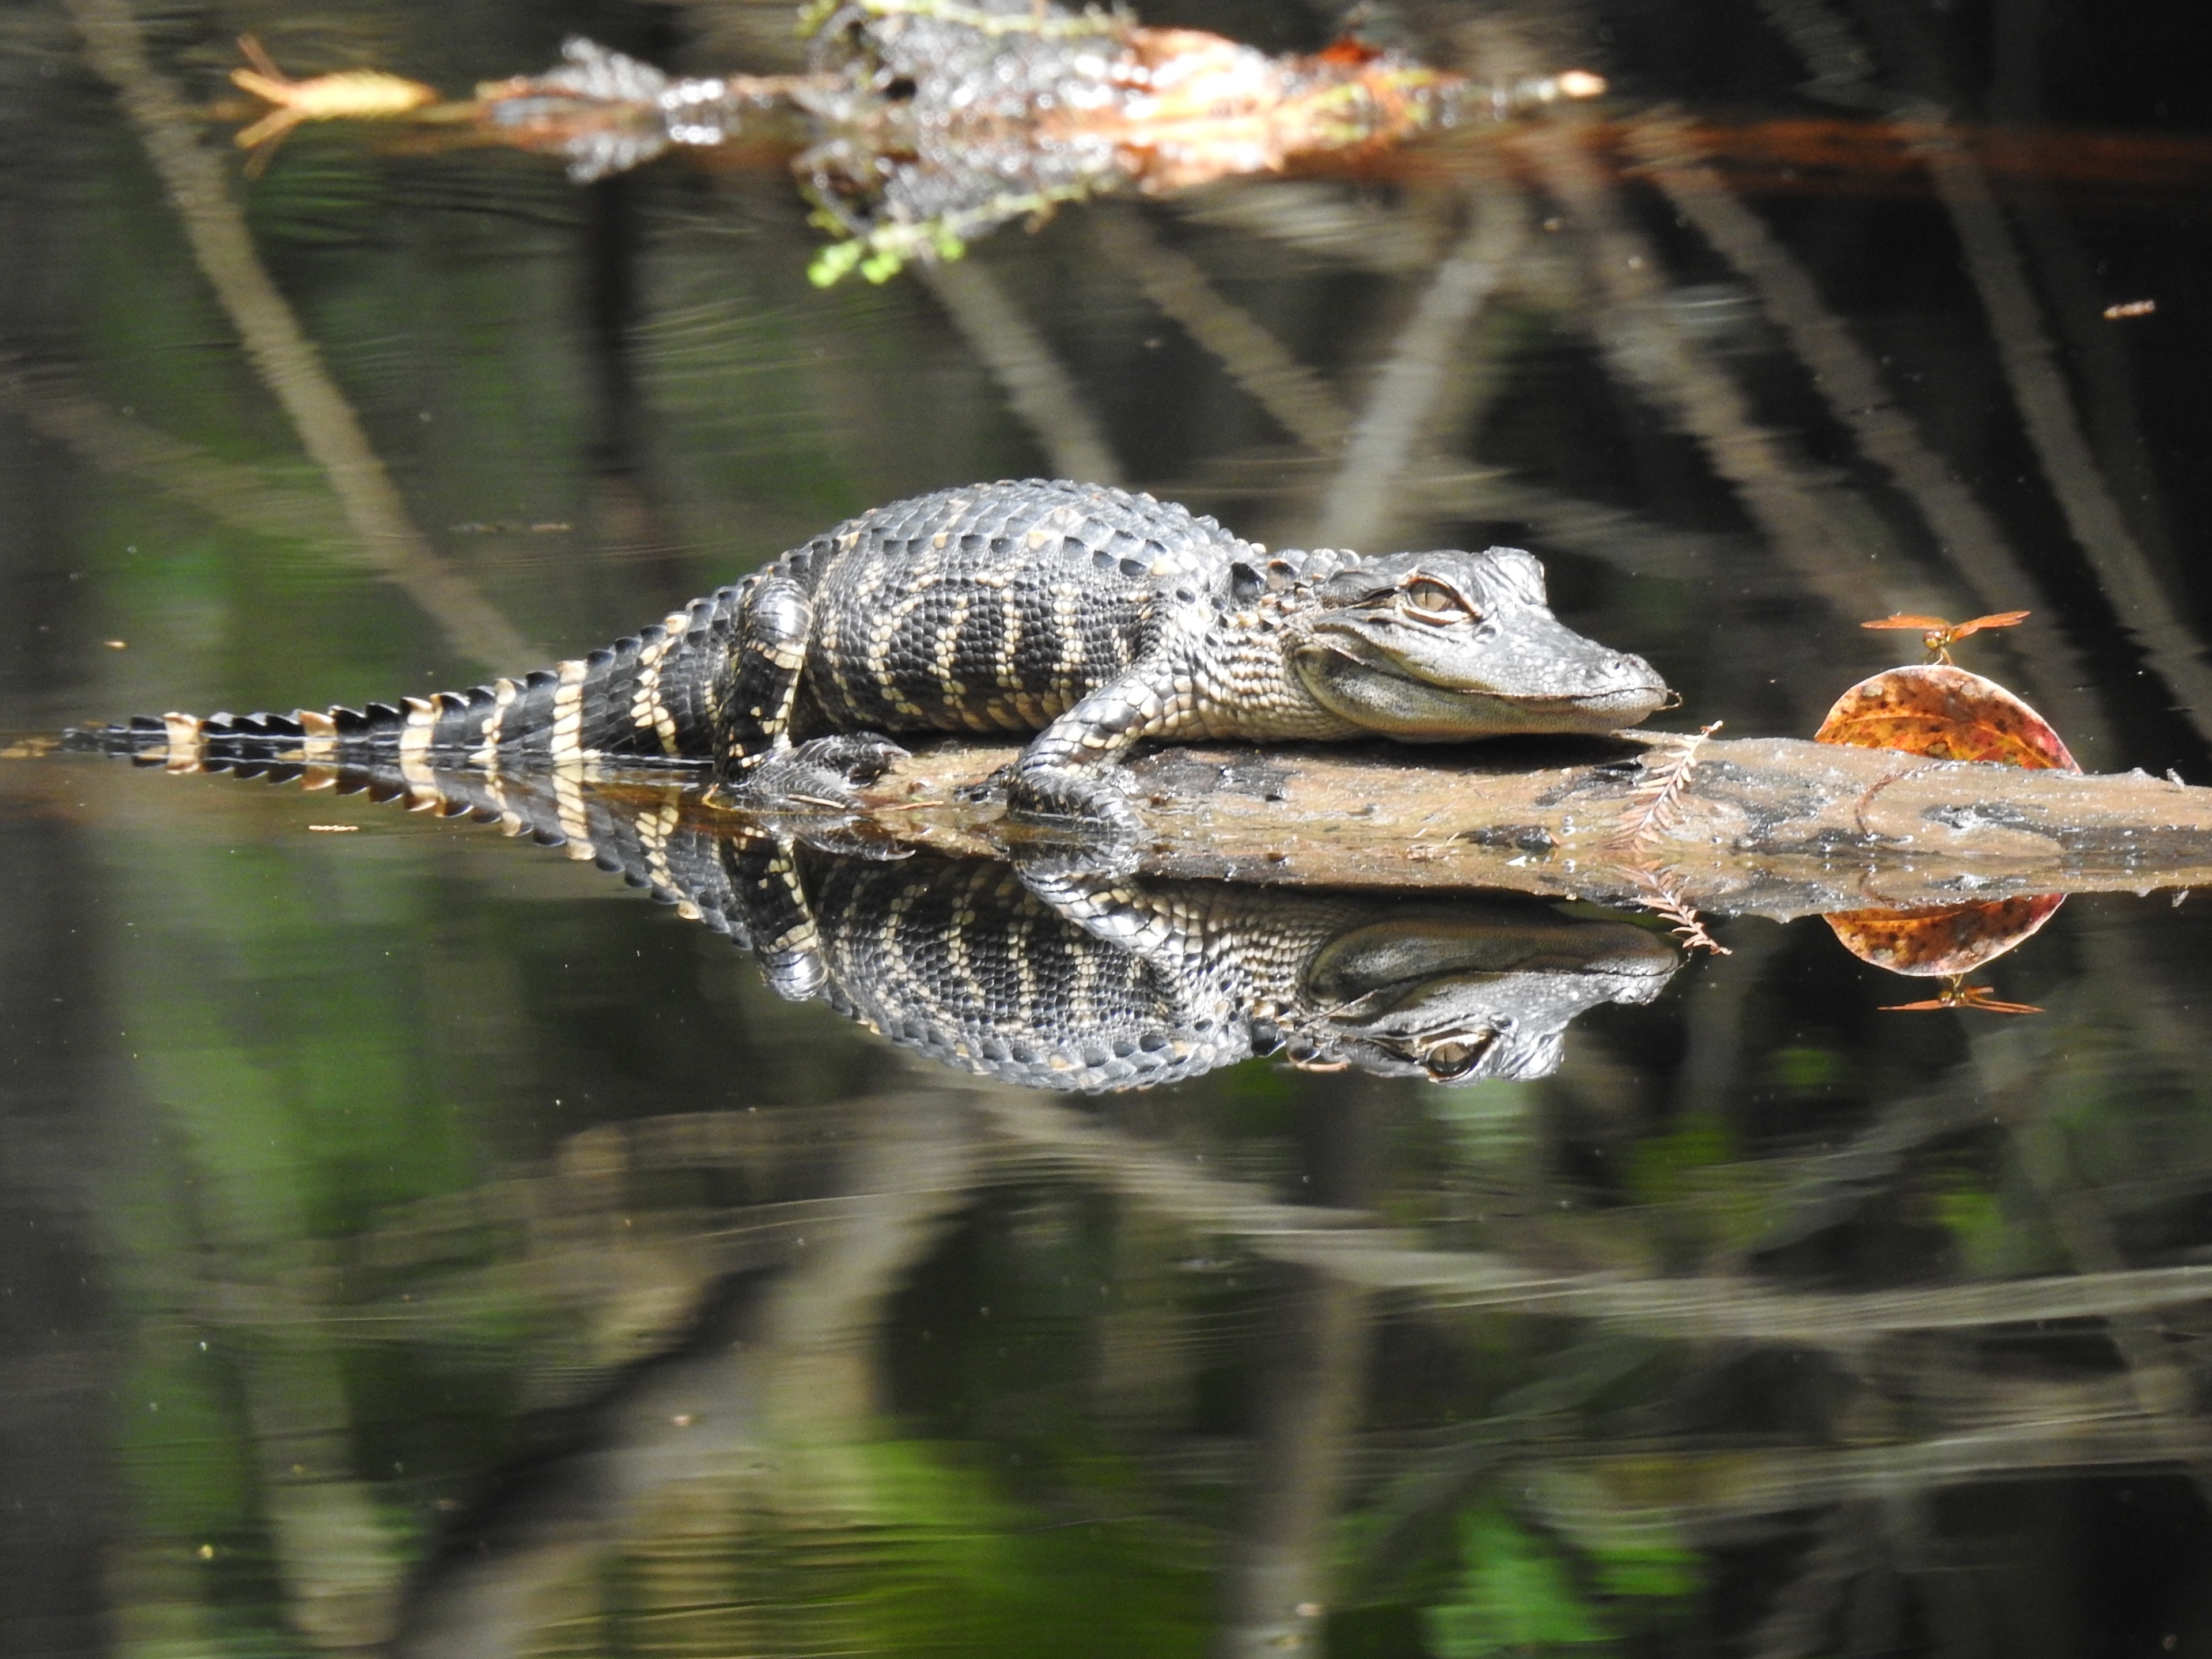 An alligator and a dragonfly soaking up the sun.